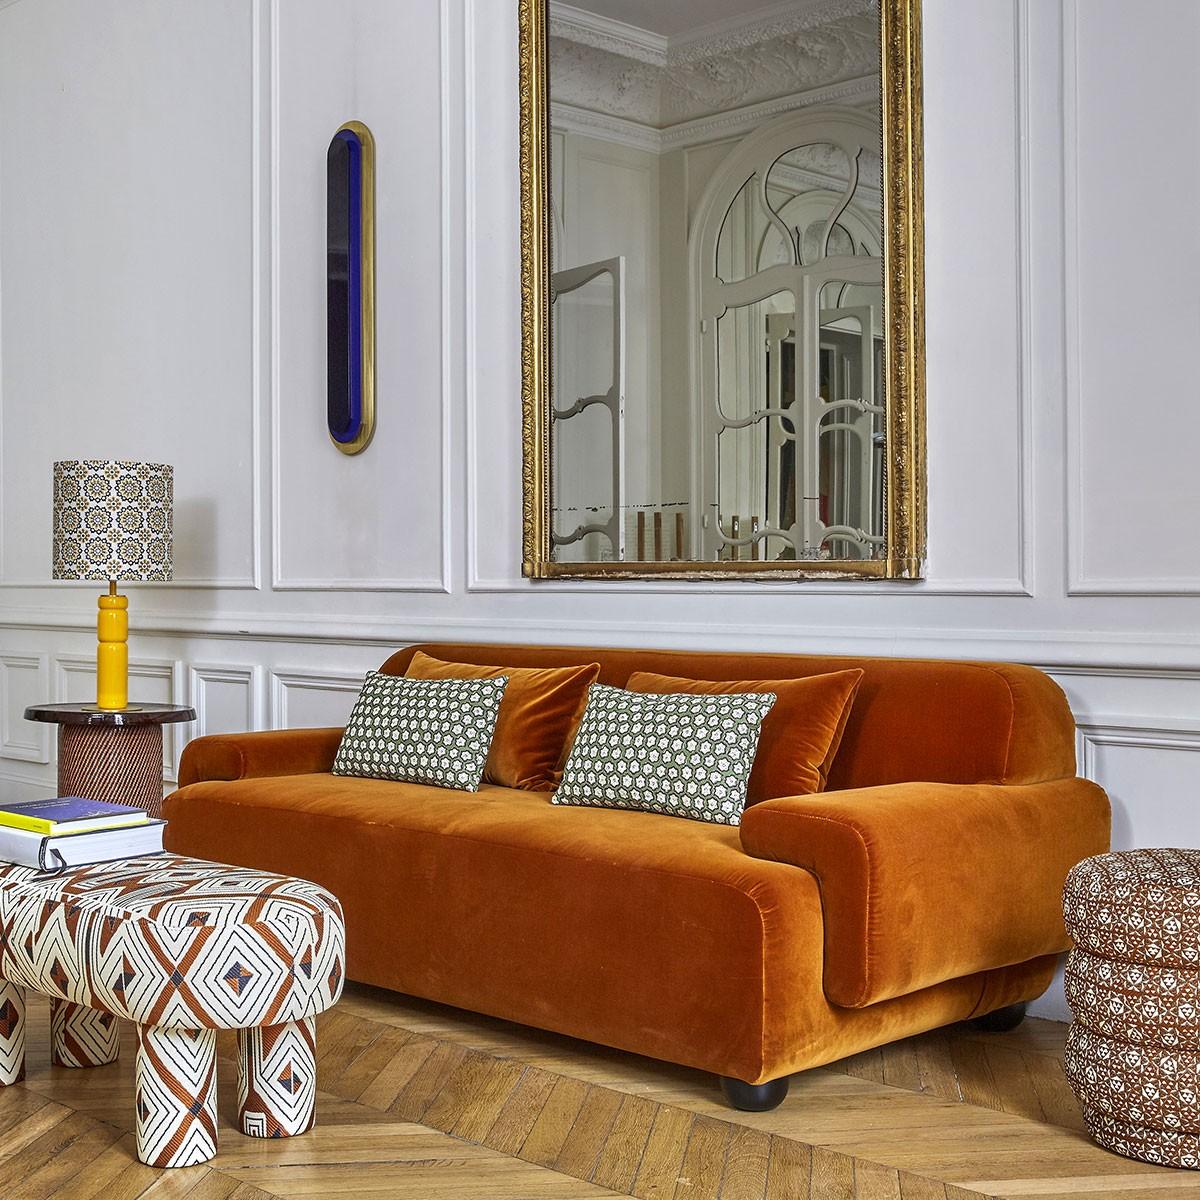 Popus Editions Lena 2.5 seater sofa in Brown Verone Velvet Upholstery

It looks like it's straight out of a movie, with its generous curves and wide armrests. It is a real invitation to spend long Sundays with the family, comfortably seated in